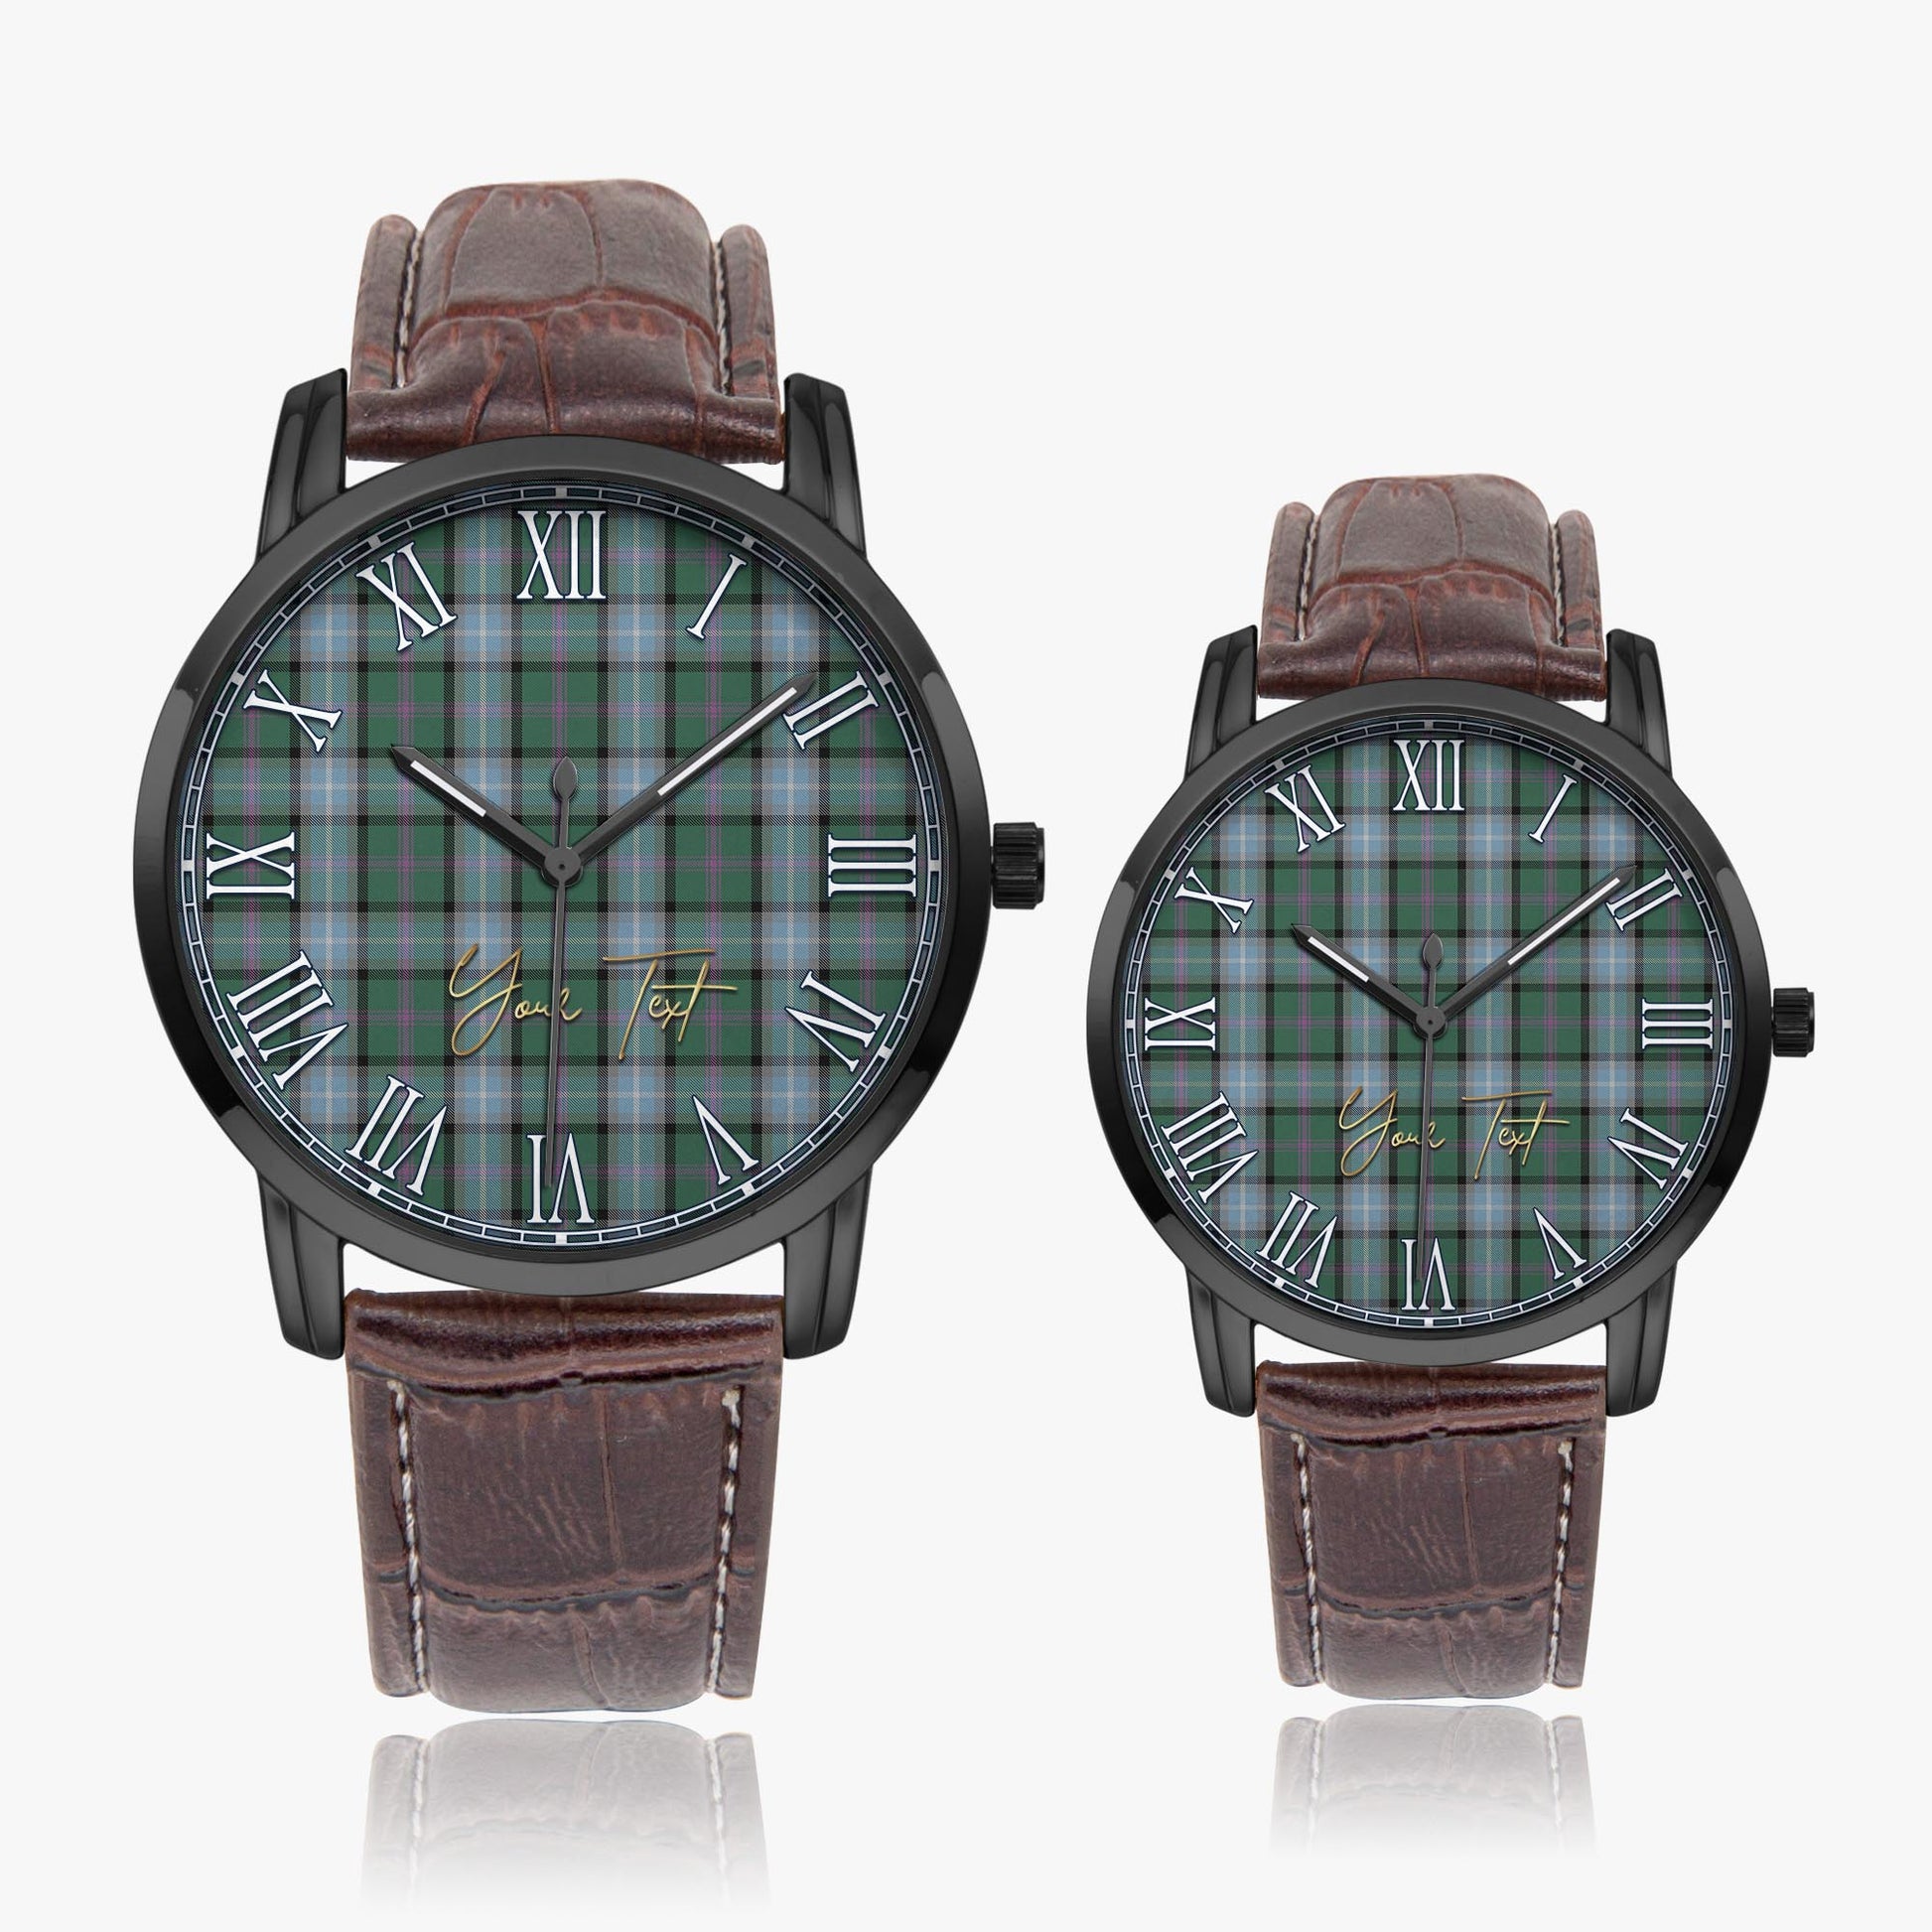 Alexander of Menstry Hunting Tartan Personalized Your Text Leather Trap Quartz Watch Wide Type Black Case With Brown Leather Strap - Tartanvibesclothing